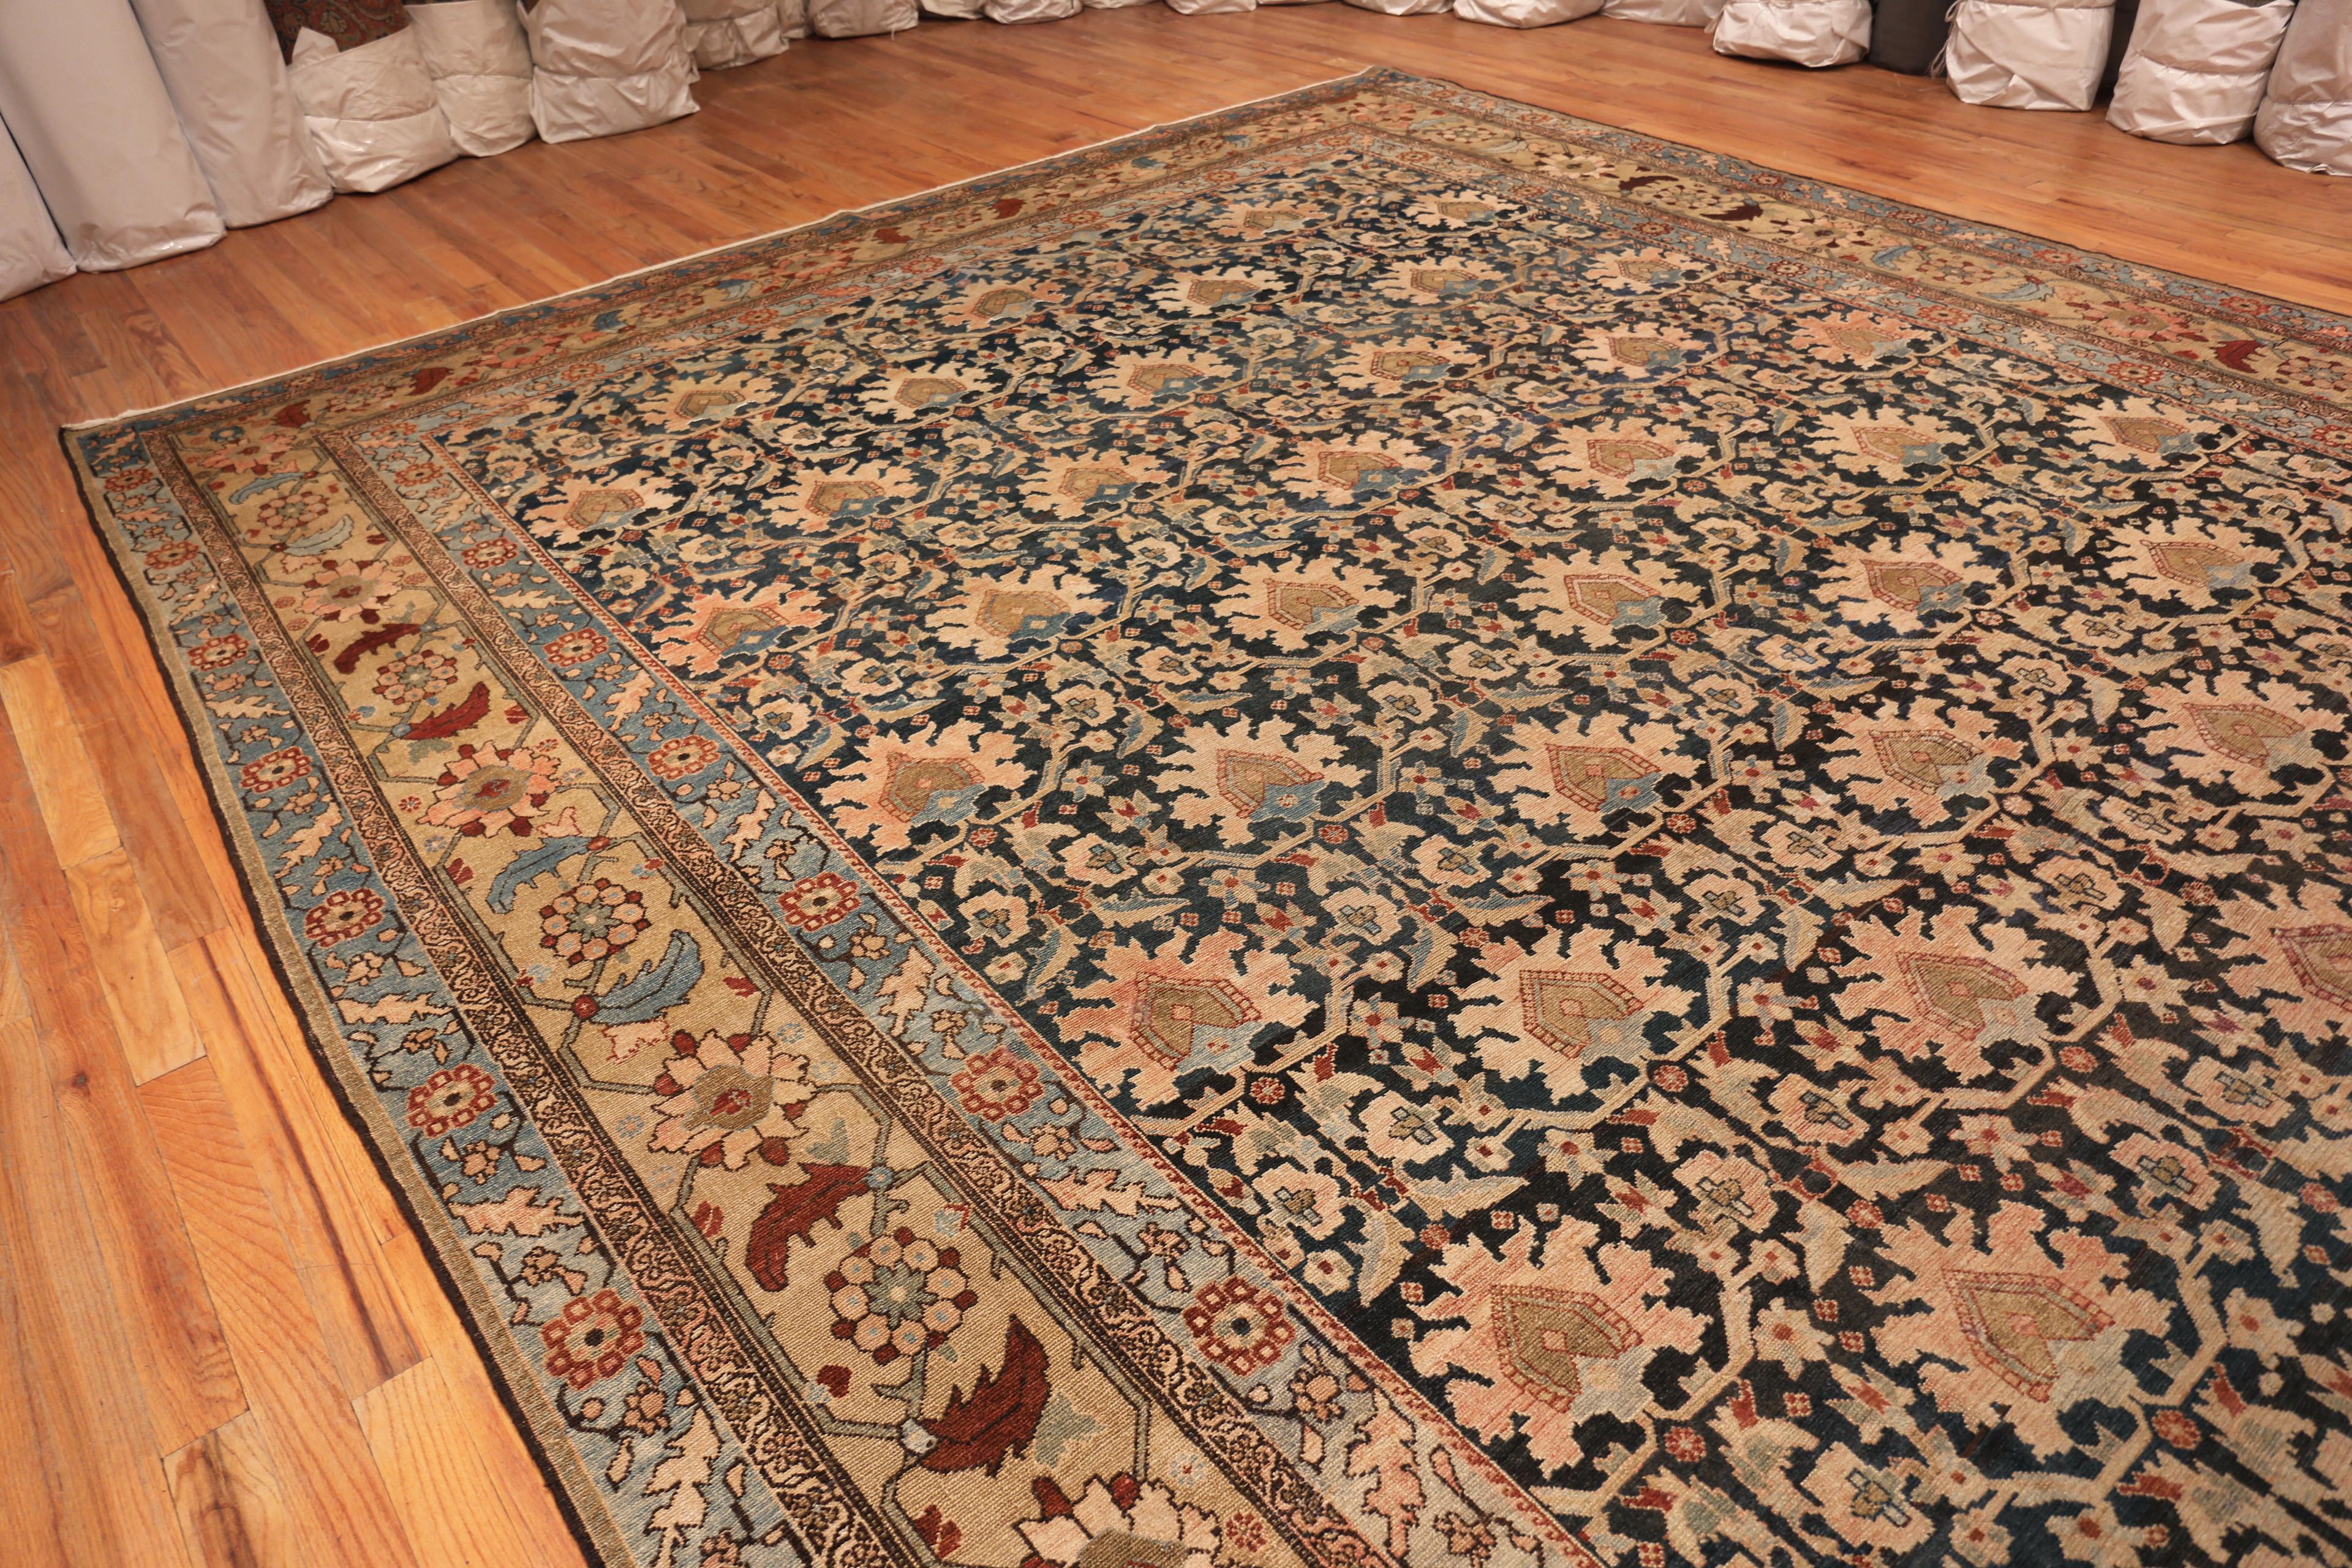 Oversized Antique Persian Malayer Rug, Country of origin: Persia, Circa date: 1900. Size: 13 ft x 24 ft (3.96 m x 7.32 m)